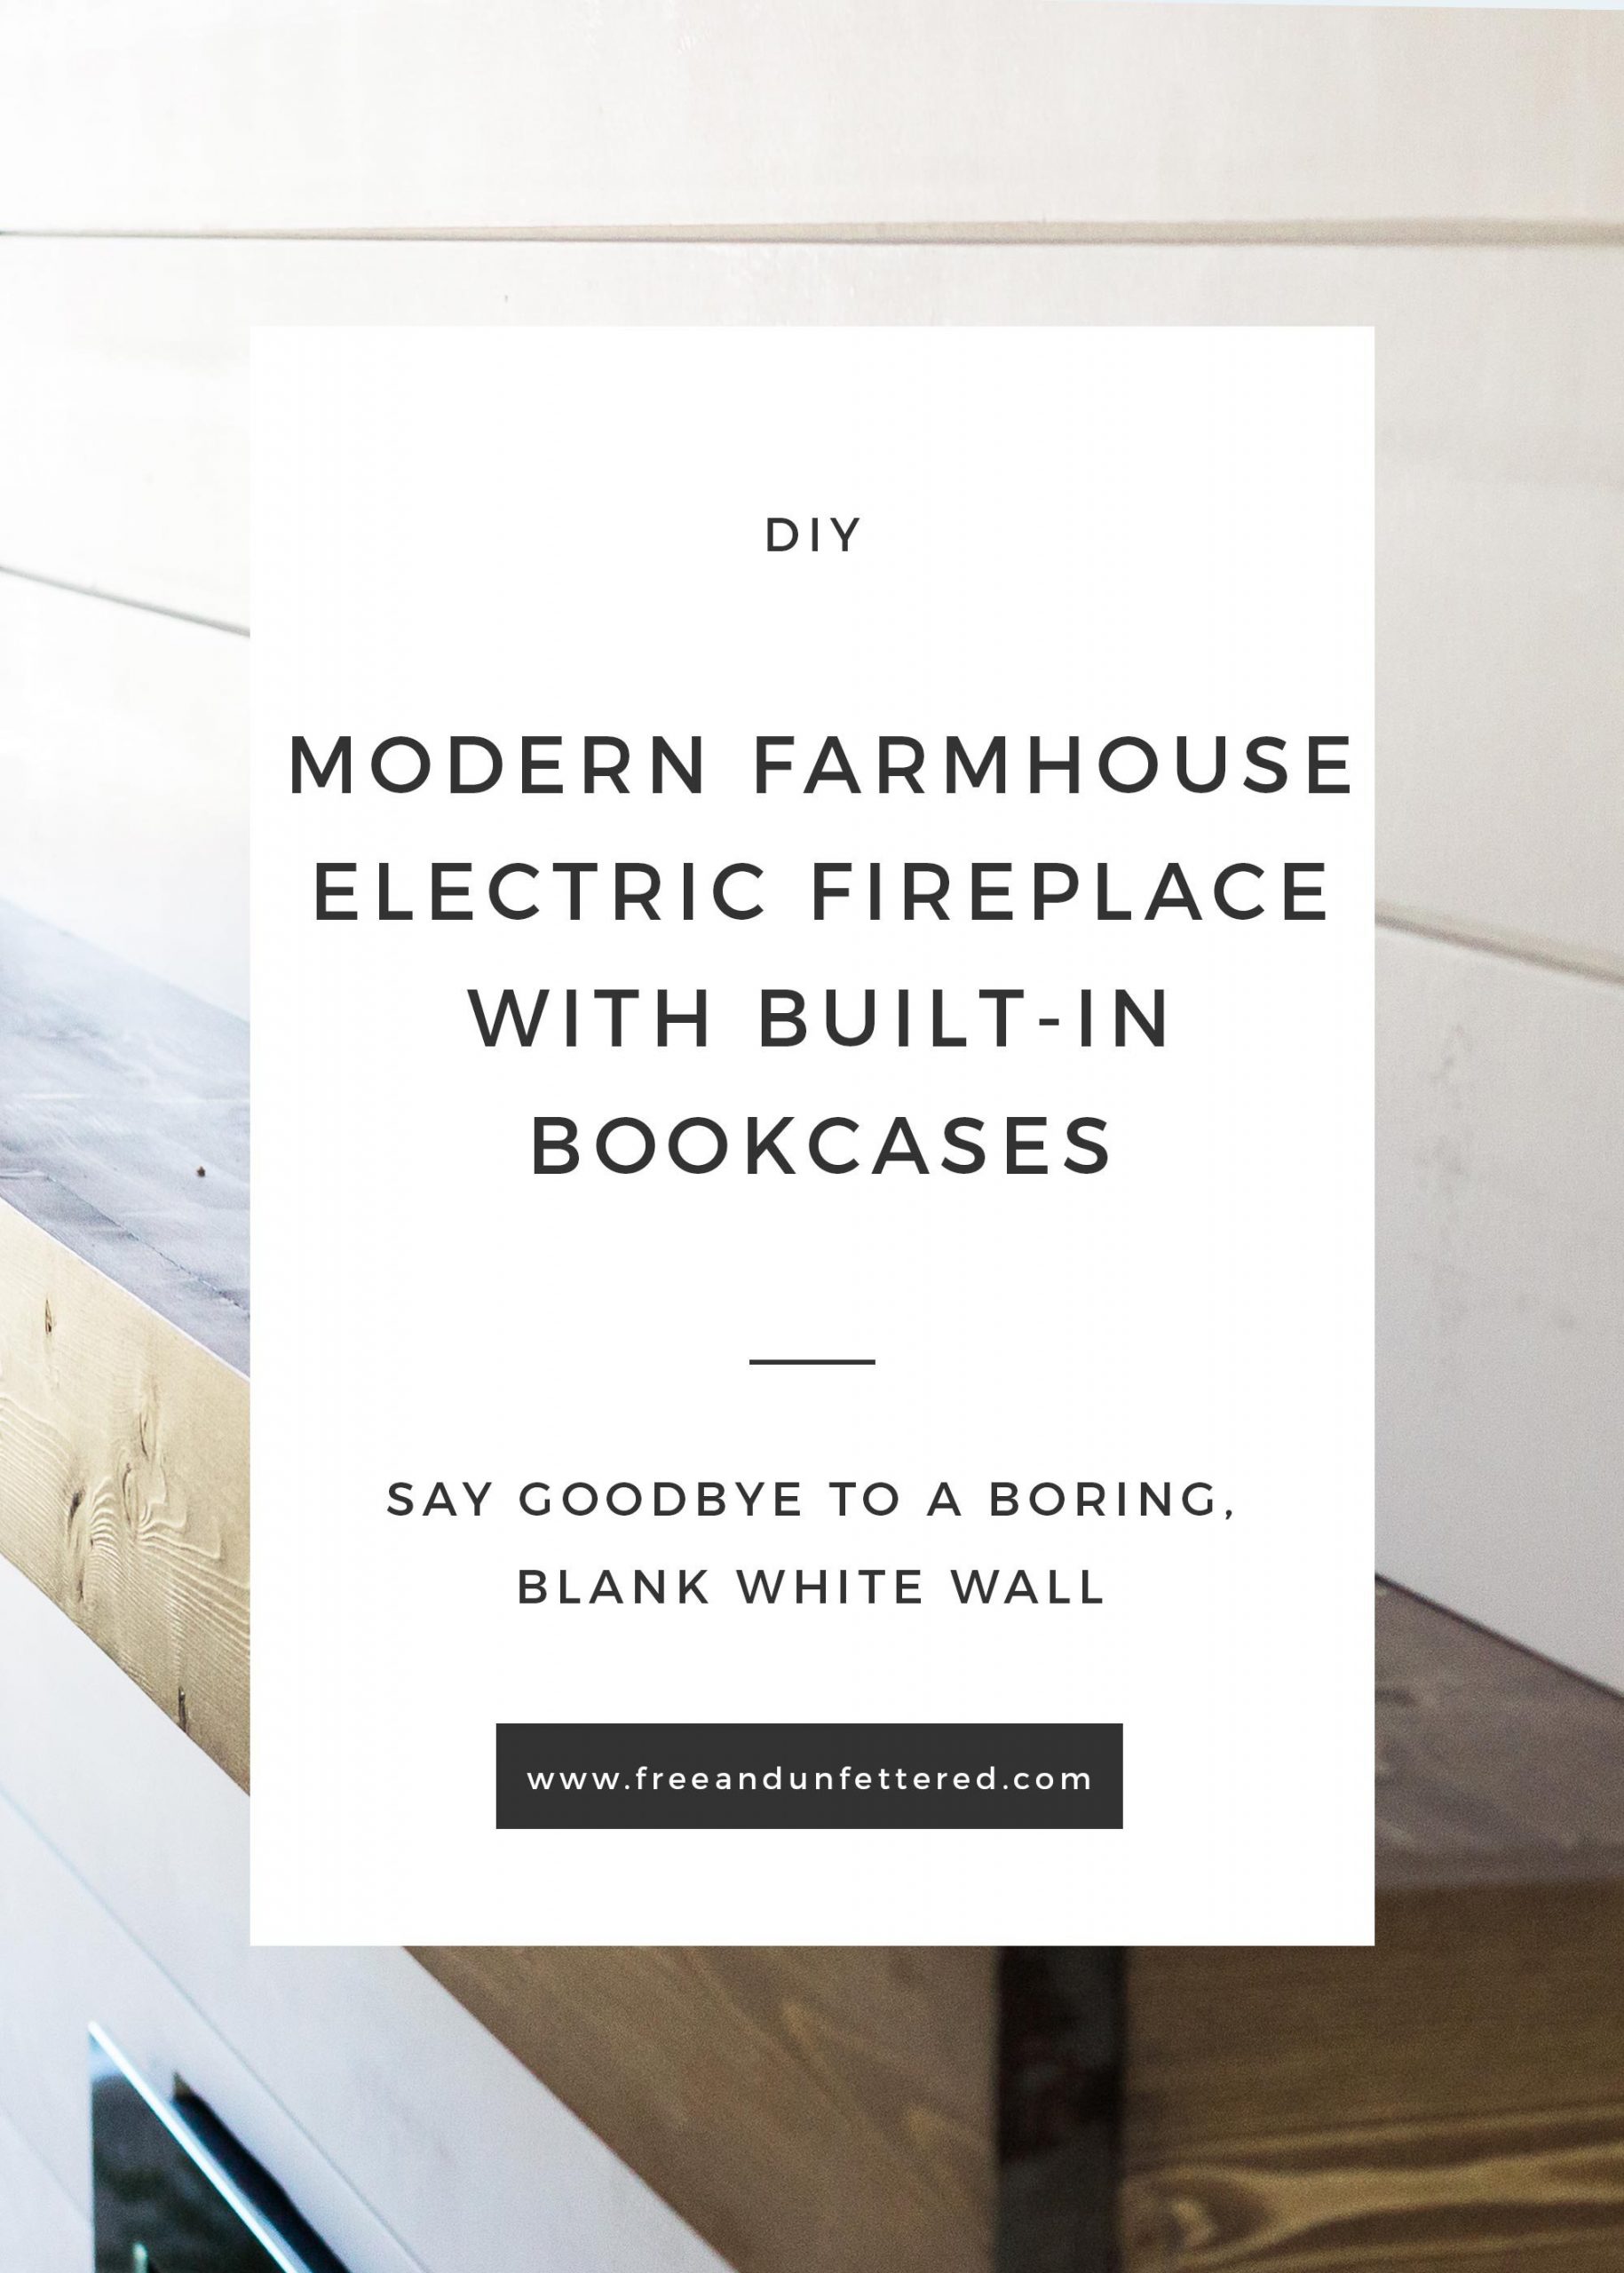 Electric Fireplace with Bookcase Fresh Diy Electric Fireplace with Built In Bookshelves